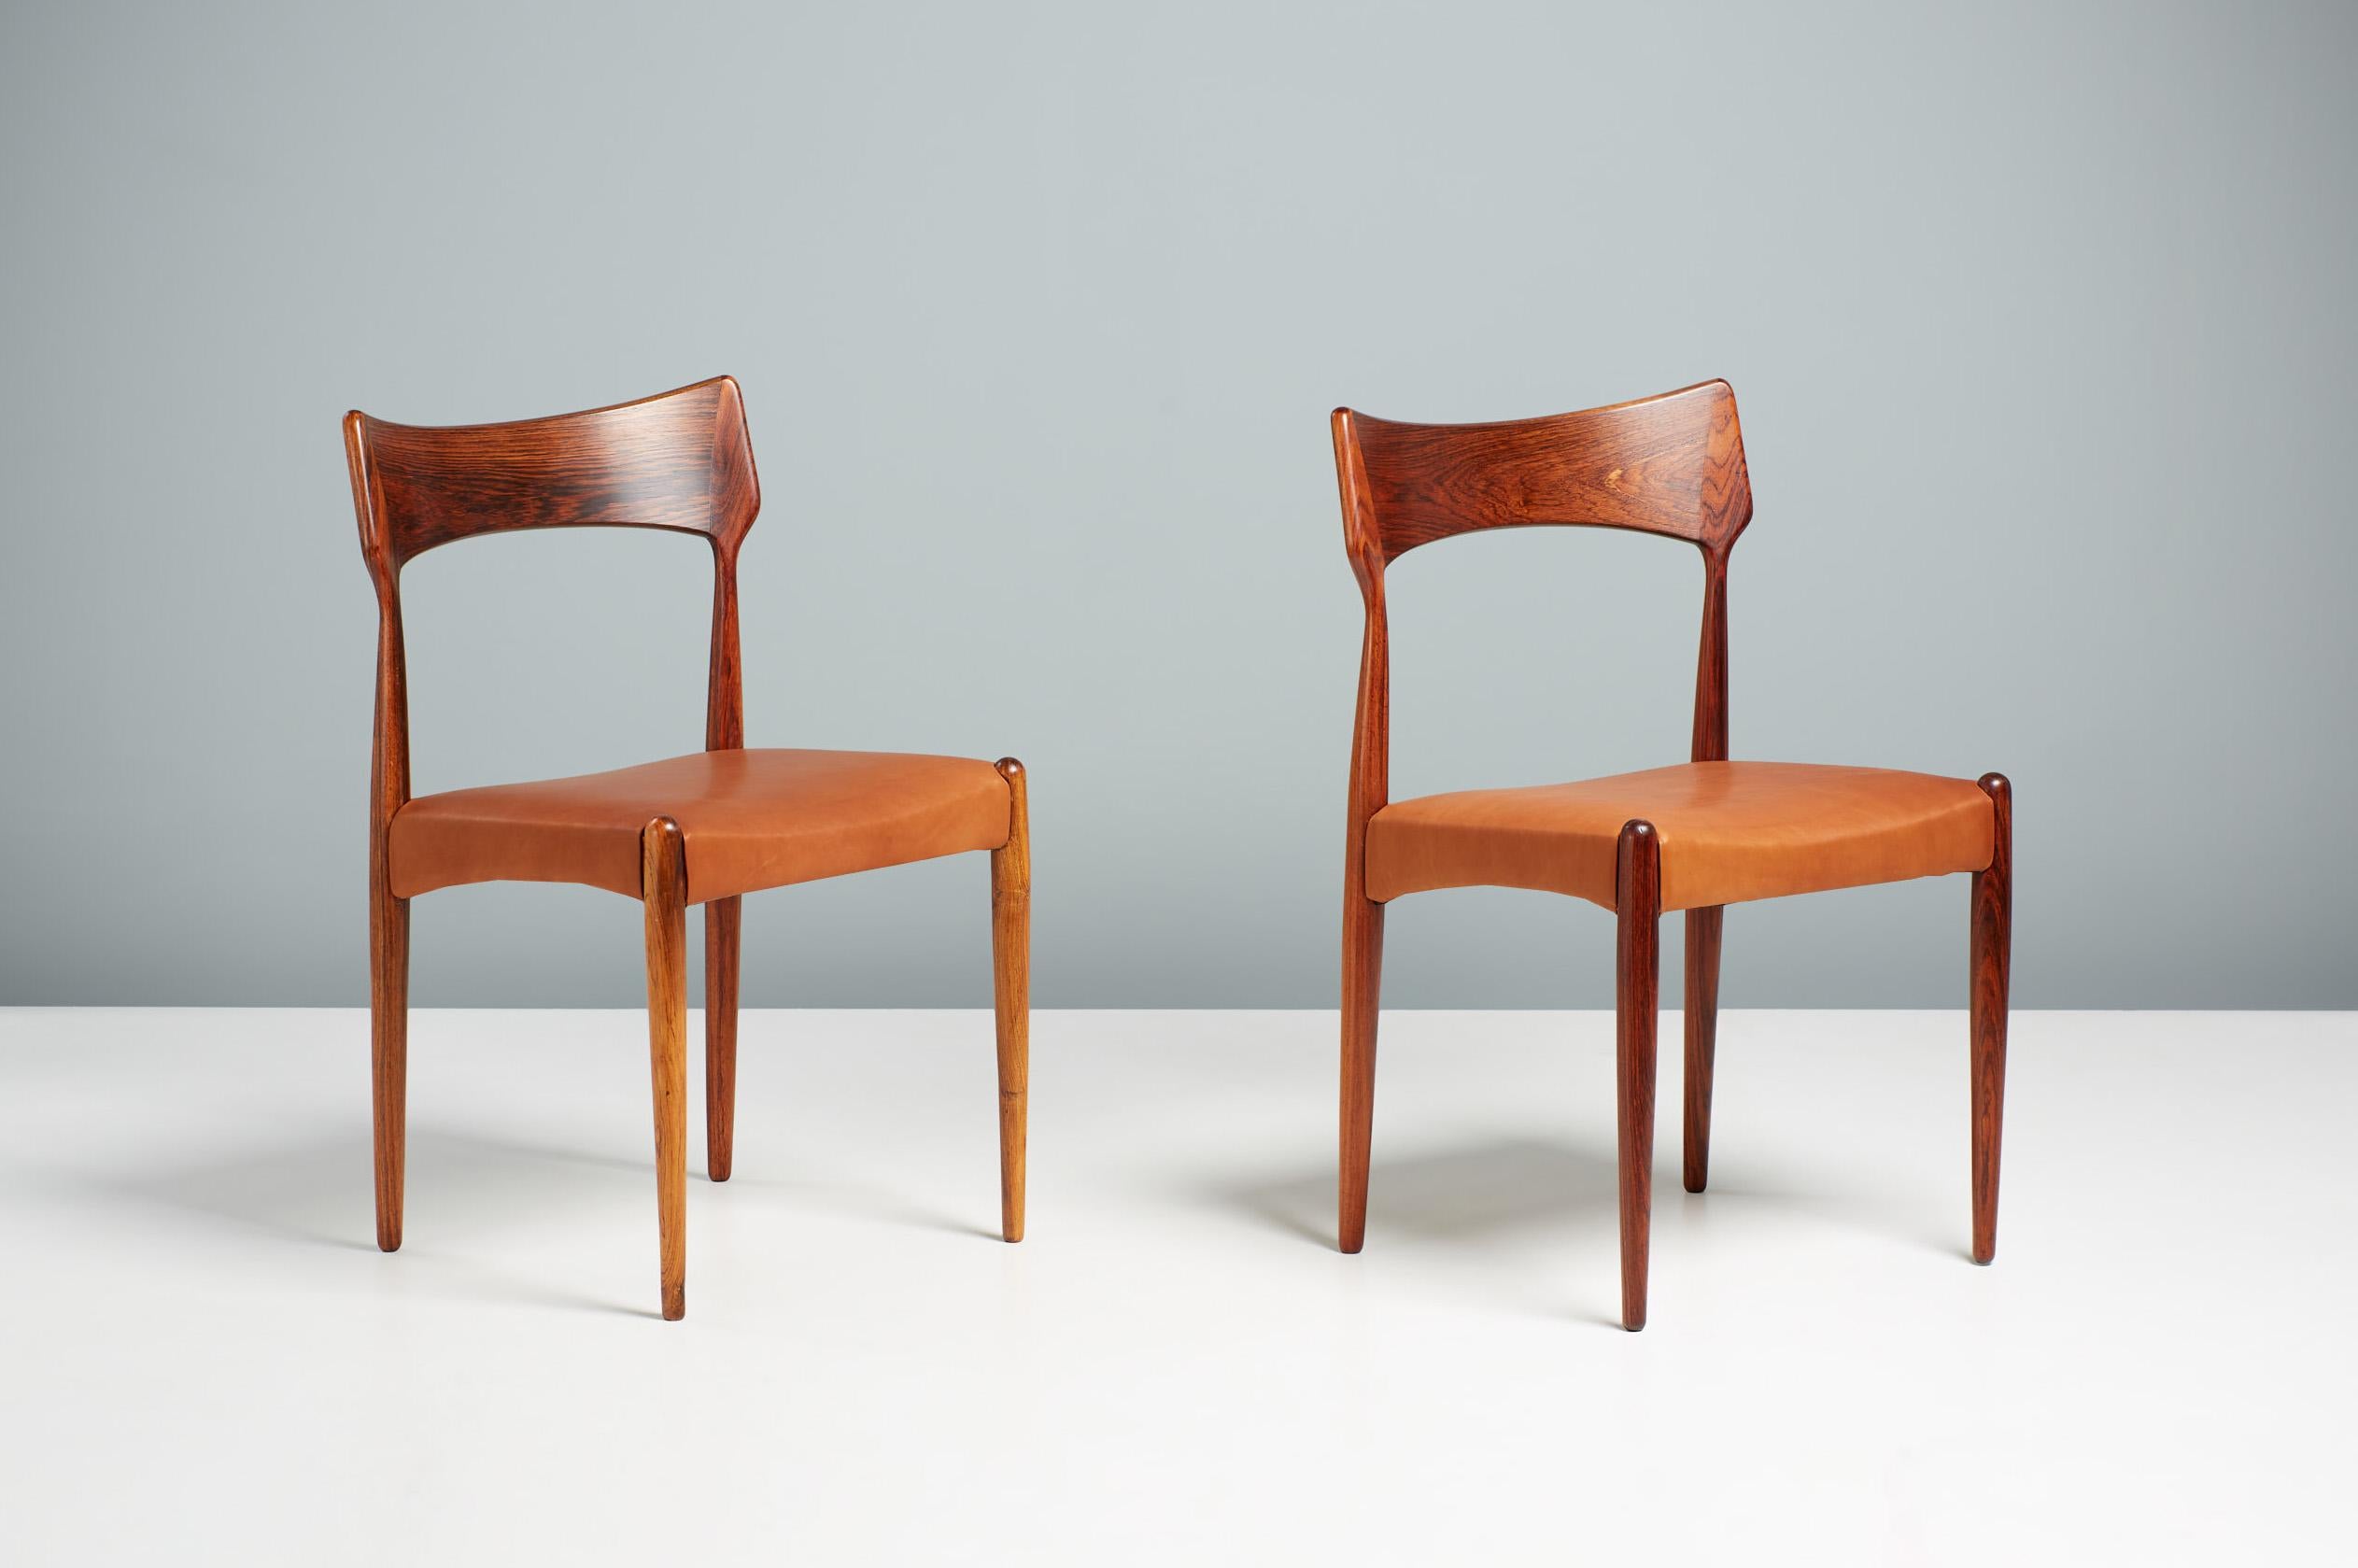 Set of 8 Bernard Petersen Rosewood Dining Chairs, C1960s In Excellent Condition For Sale In London, GB